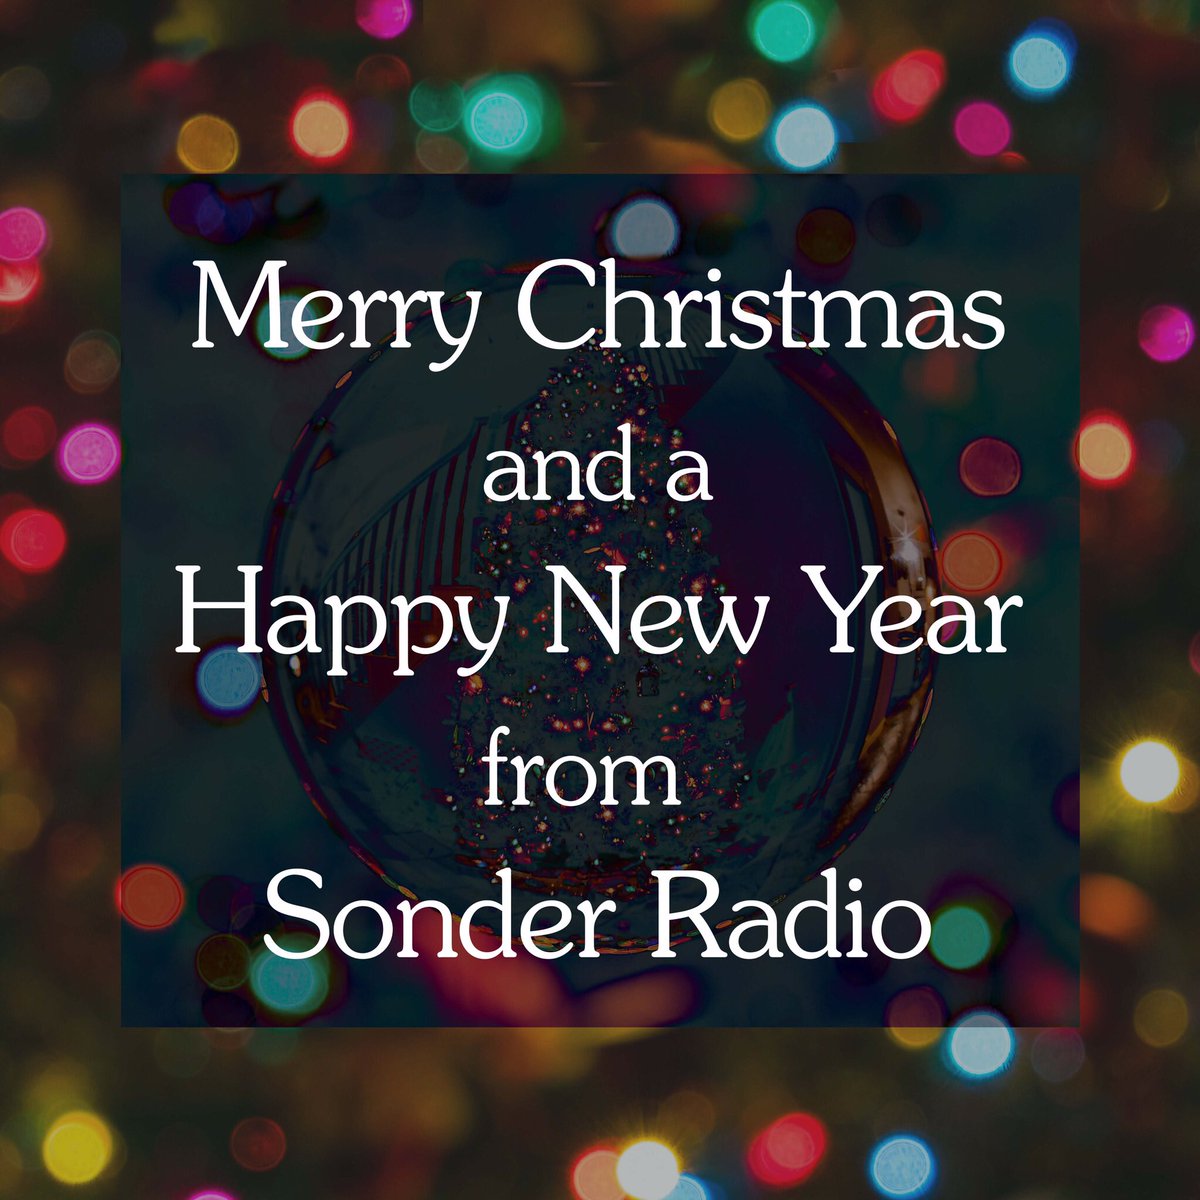 Season’s Greetings from Sonder Radio! We want to say thank you for being a part of journey and wish you a happy new year! Keep an eye out for another show coming up very soon 👀 #sonder #manchesterradio